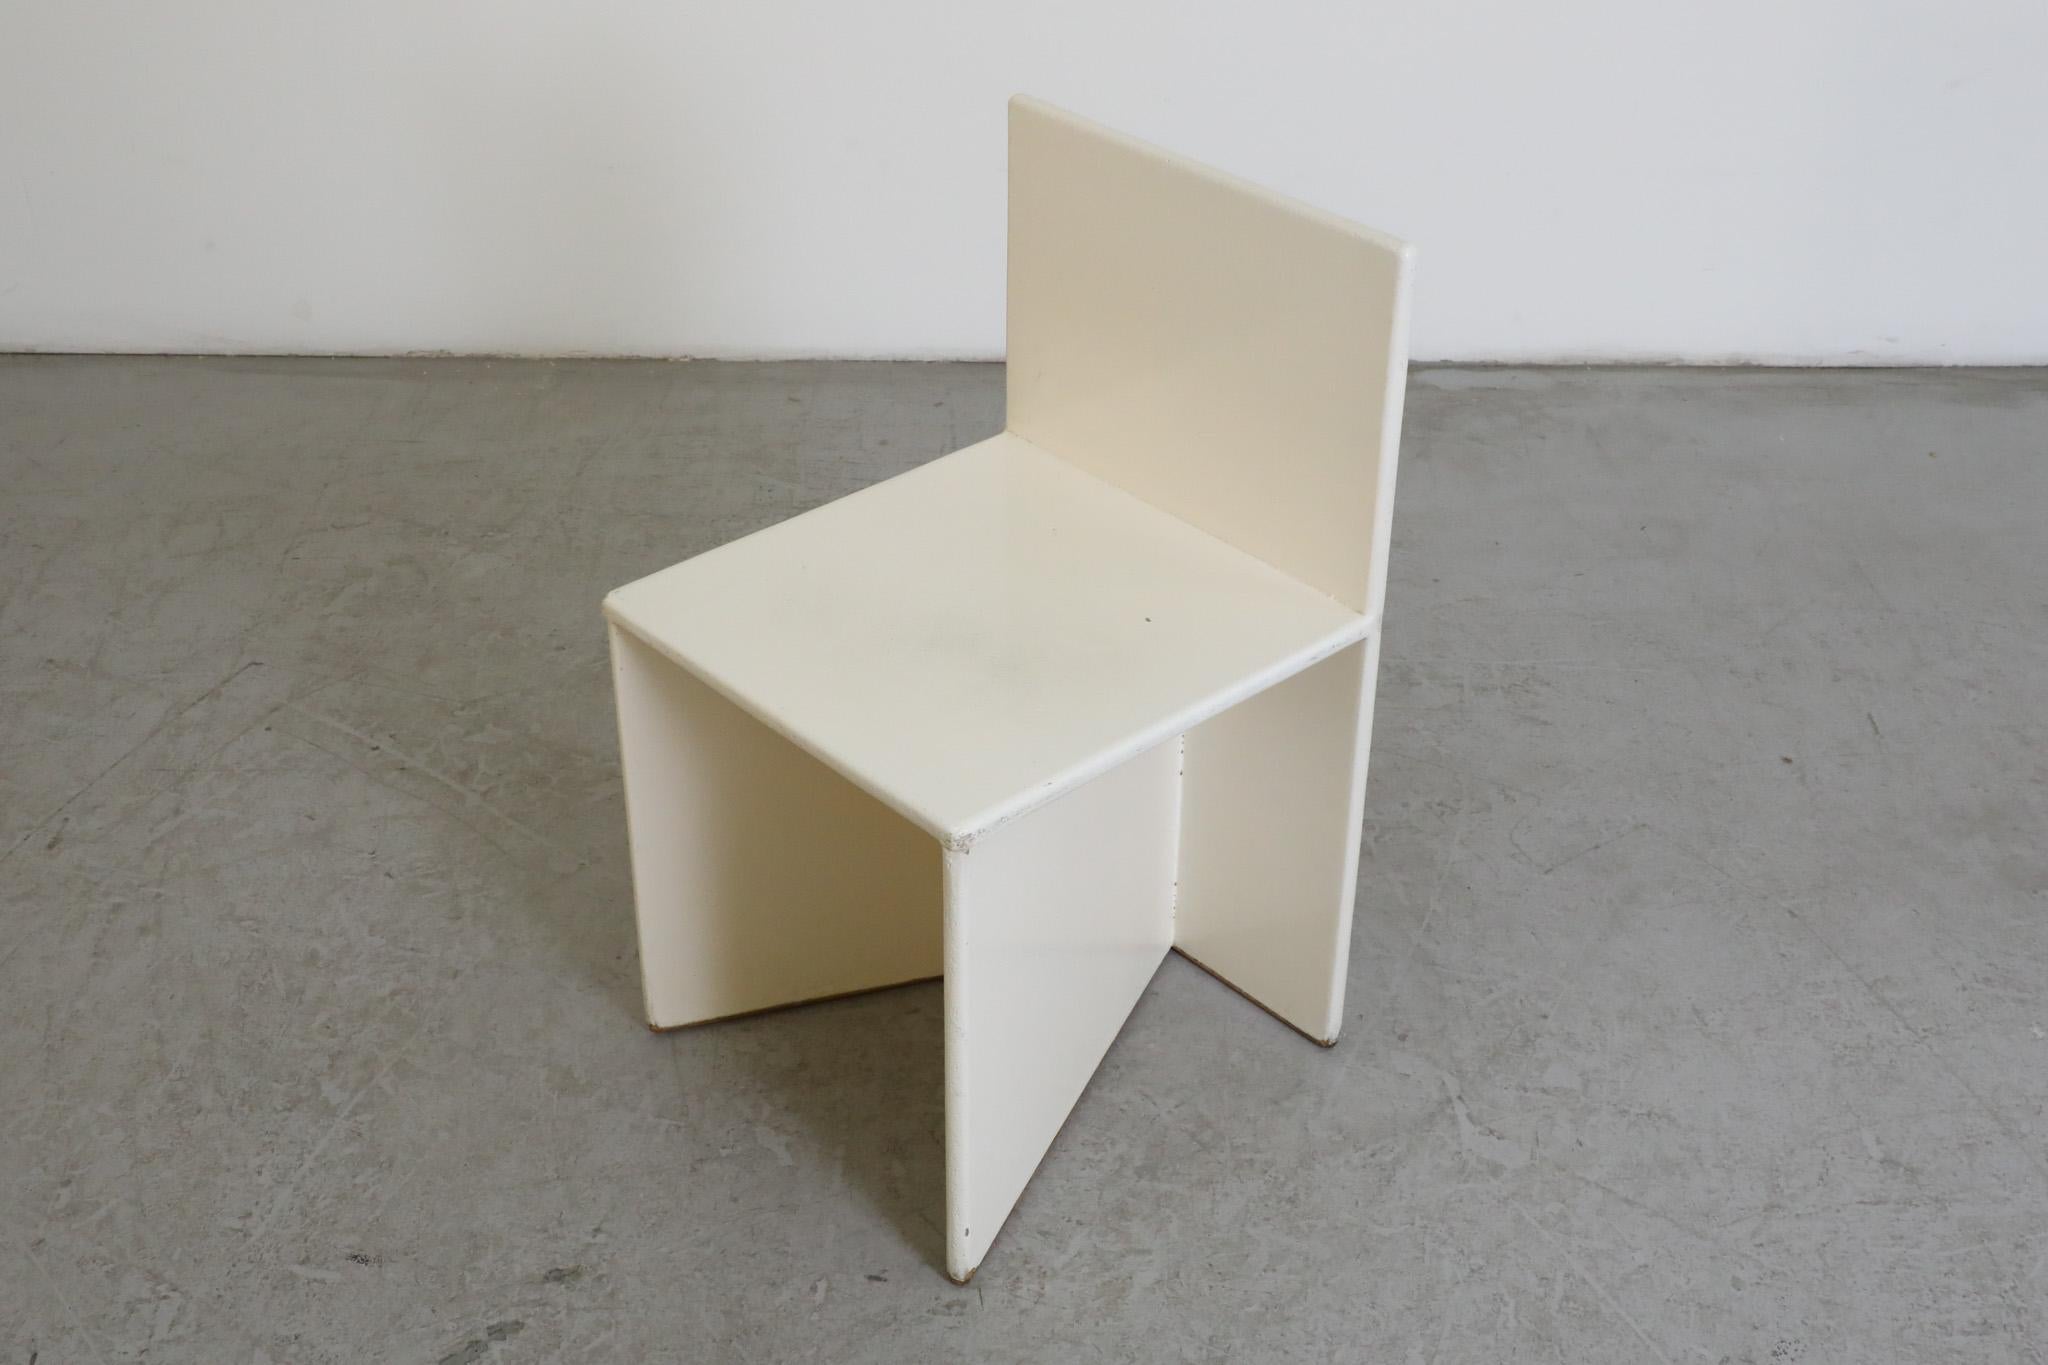 Pre War Gerrit Rietveld Style Modernist Painted Chair For Sale 4